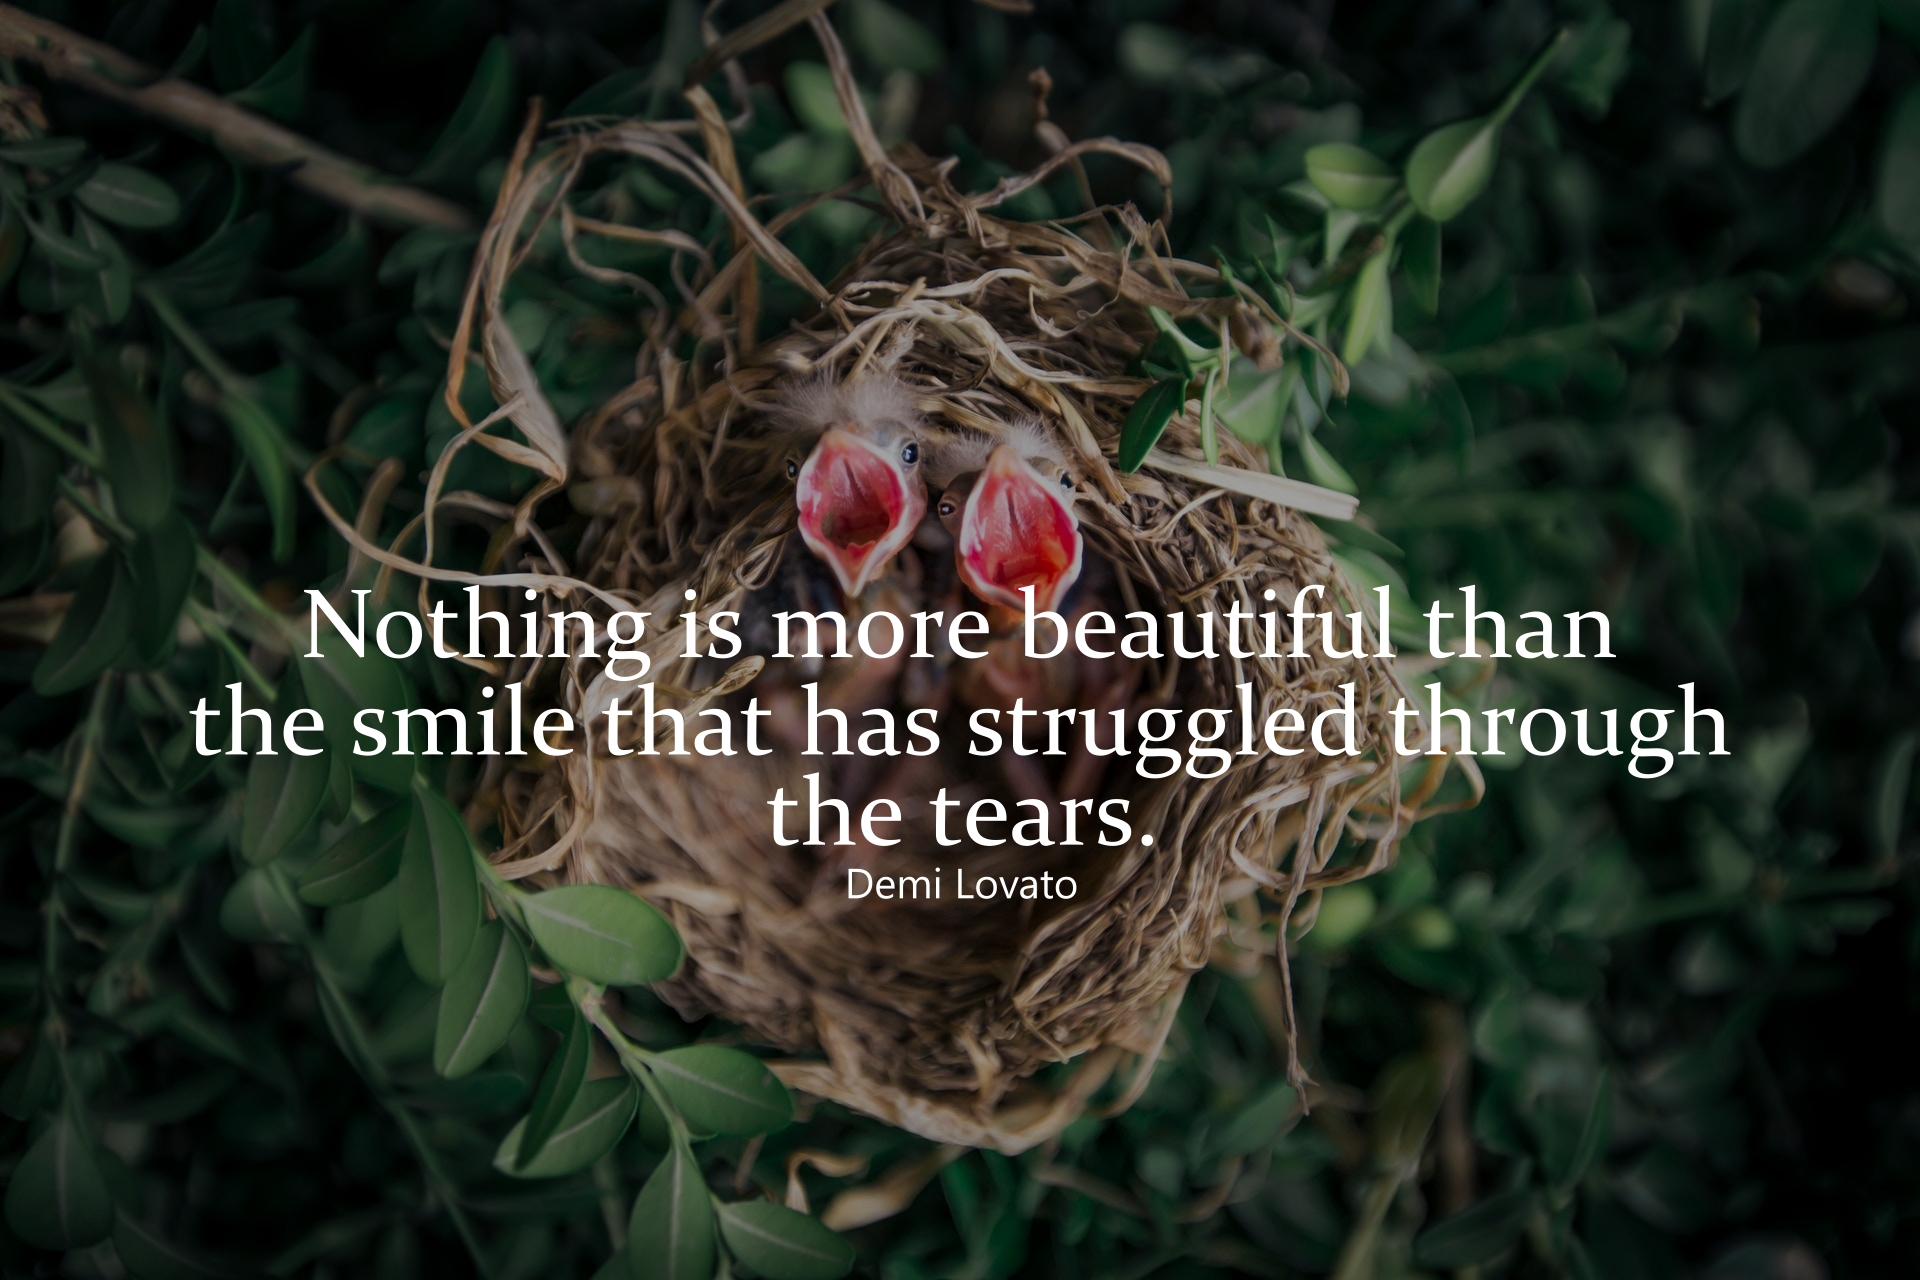 Quotes For Birds Nest - HD Wallpaper 